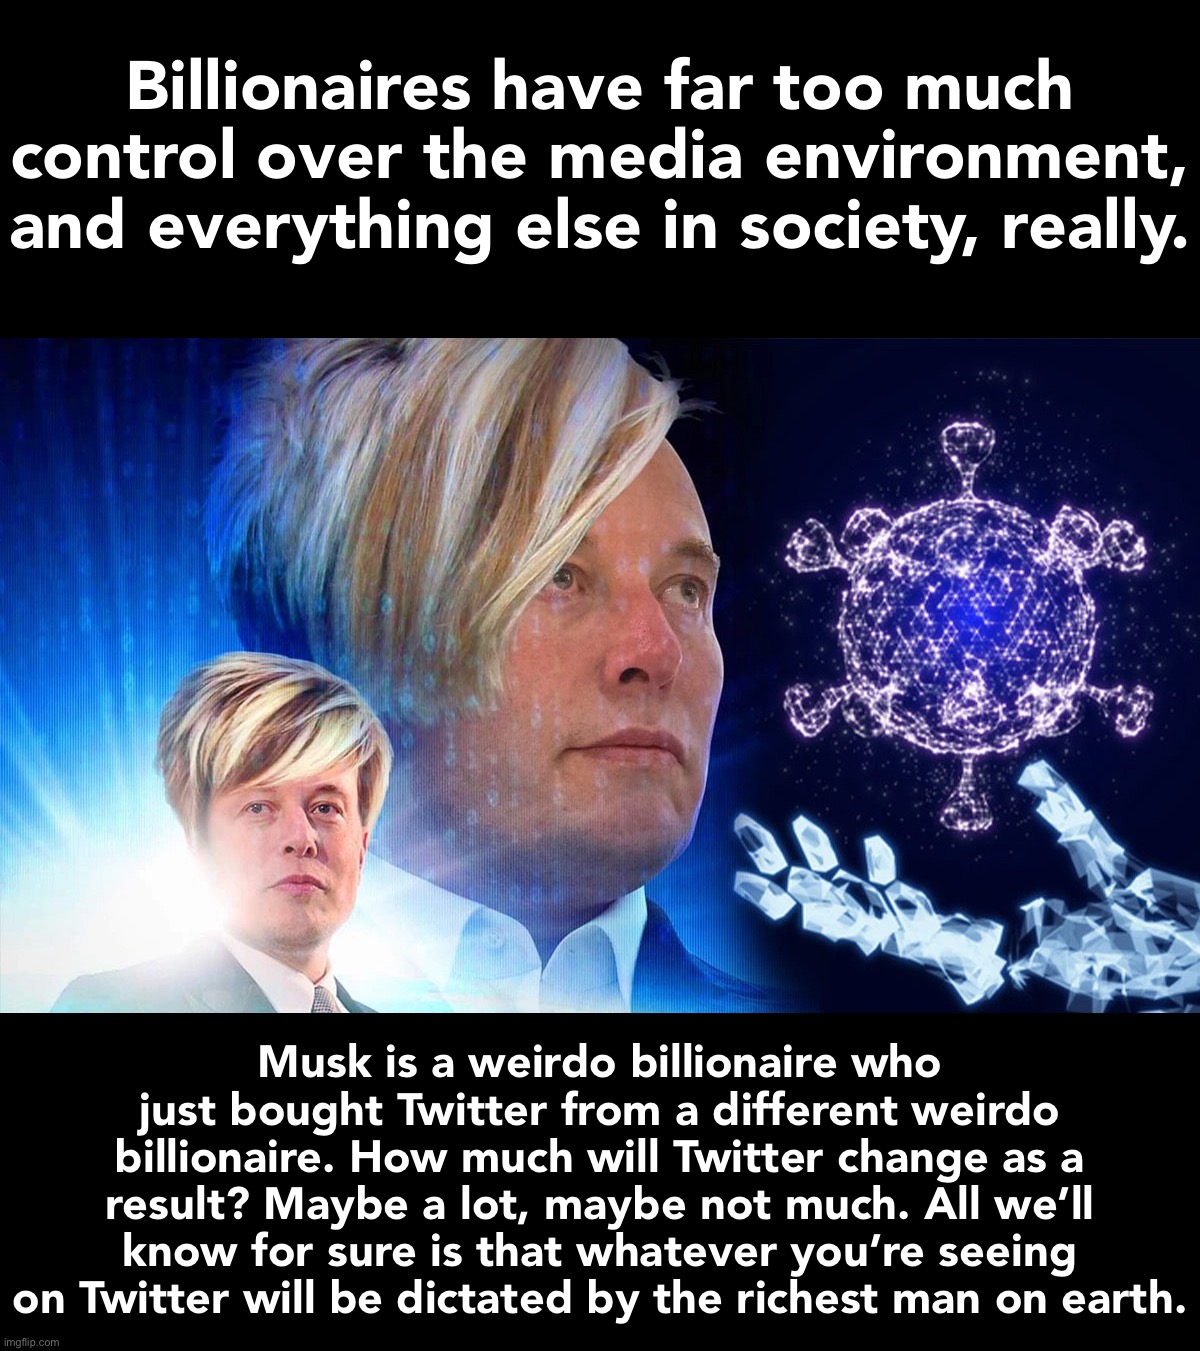 You might think “free speech” is coming to Twitter. Maybe, maybe not. Musk is the only one who knows. | Billionaires have far too much control over the media environment, and everything else in society, really. Musk is a weirdo billionaire who just bought Twitter from a different weirdo billionaire. How much will Twitter change as a result? Maybe a lot, maybe not much. All we’ll know for sure is that whatever you’re seeing on Twitter will be dictated by the richest man on earth. | image tagged in space karen,elon musk,billionaire,twitter,social media,inequality | made w/ Imgflip meme maker